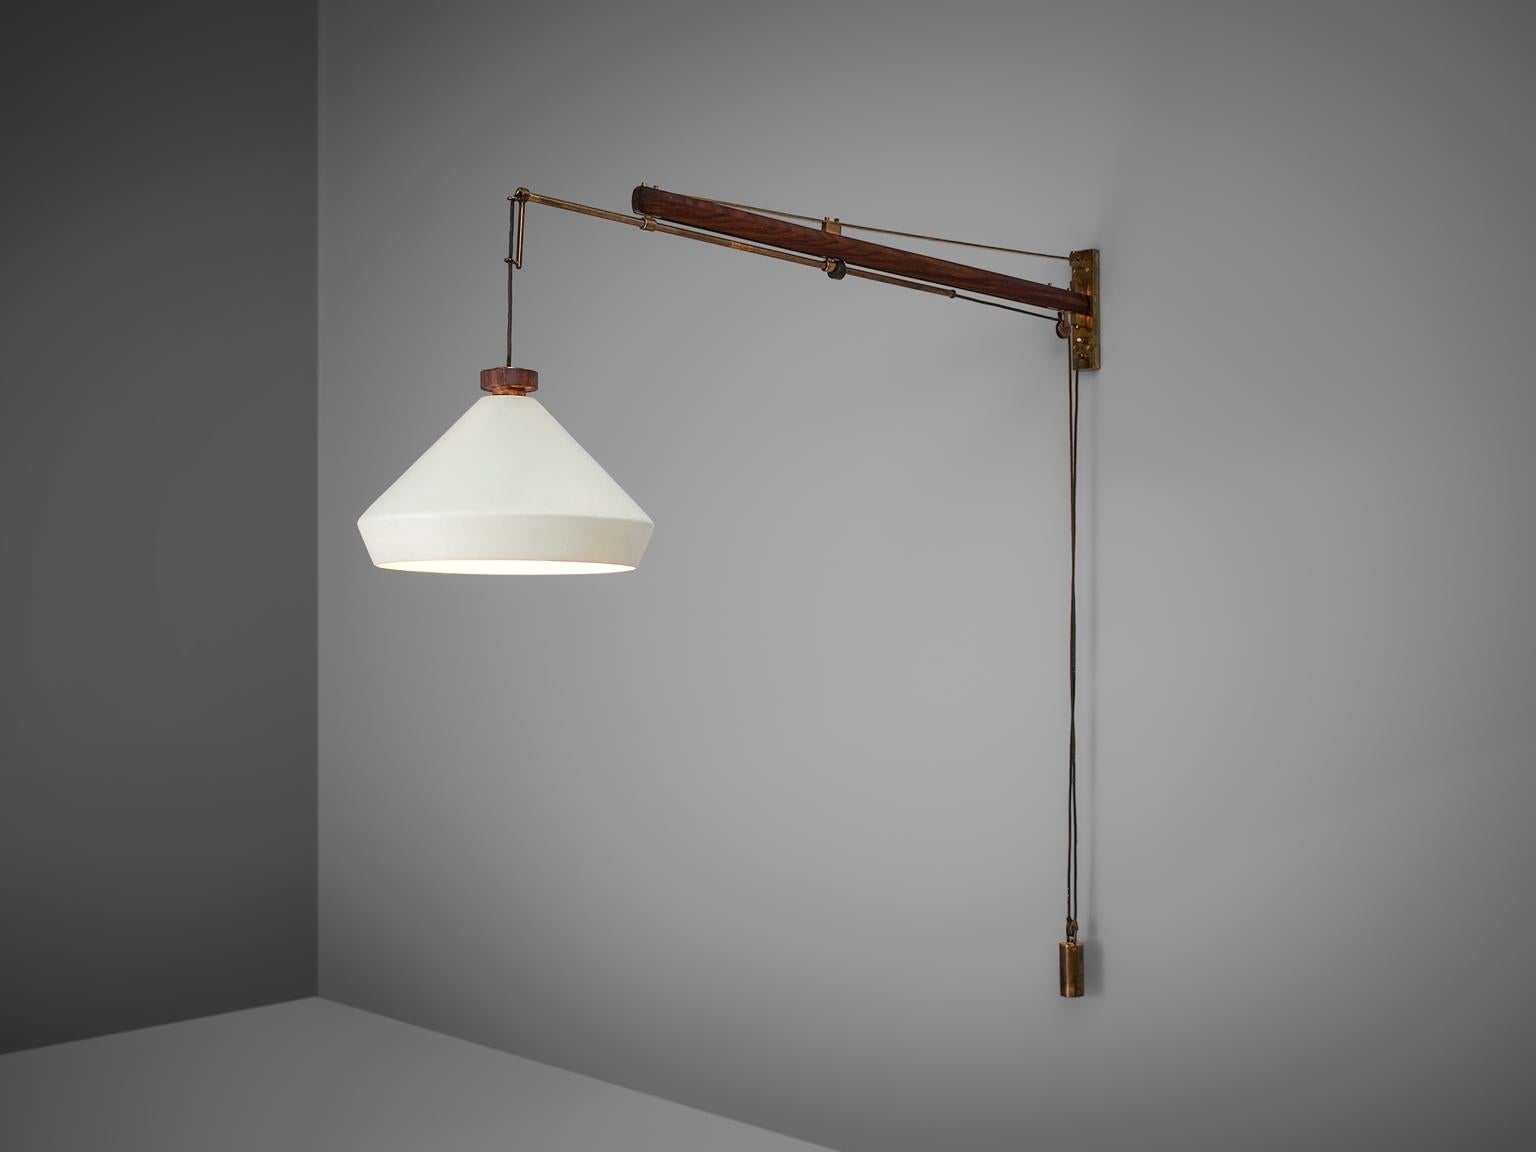 Tito Agnoli for O-Luce, wall light, white lacquered metal, rosewood, cord and brass, Italy, circa 1950. 

Industrial wall light designed by Tit Agnoli, and manufactured by O-Luce in circa 1950. This lamp is made of rosewood, lacquered metal and